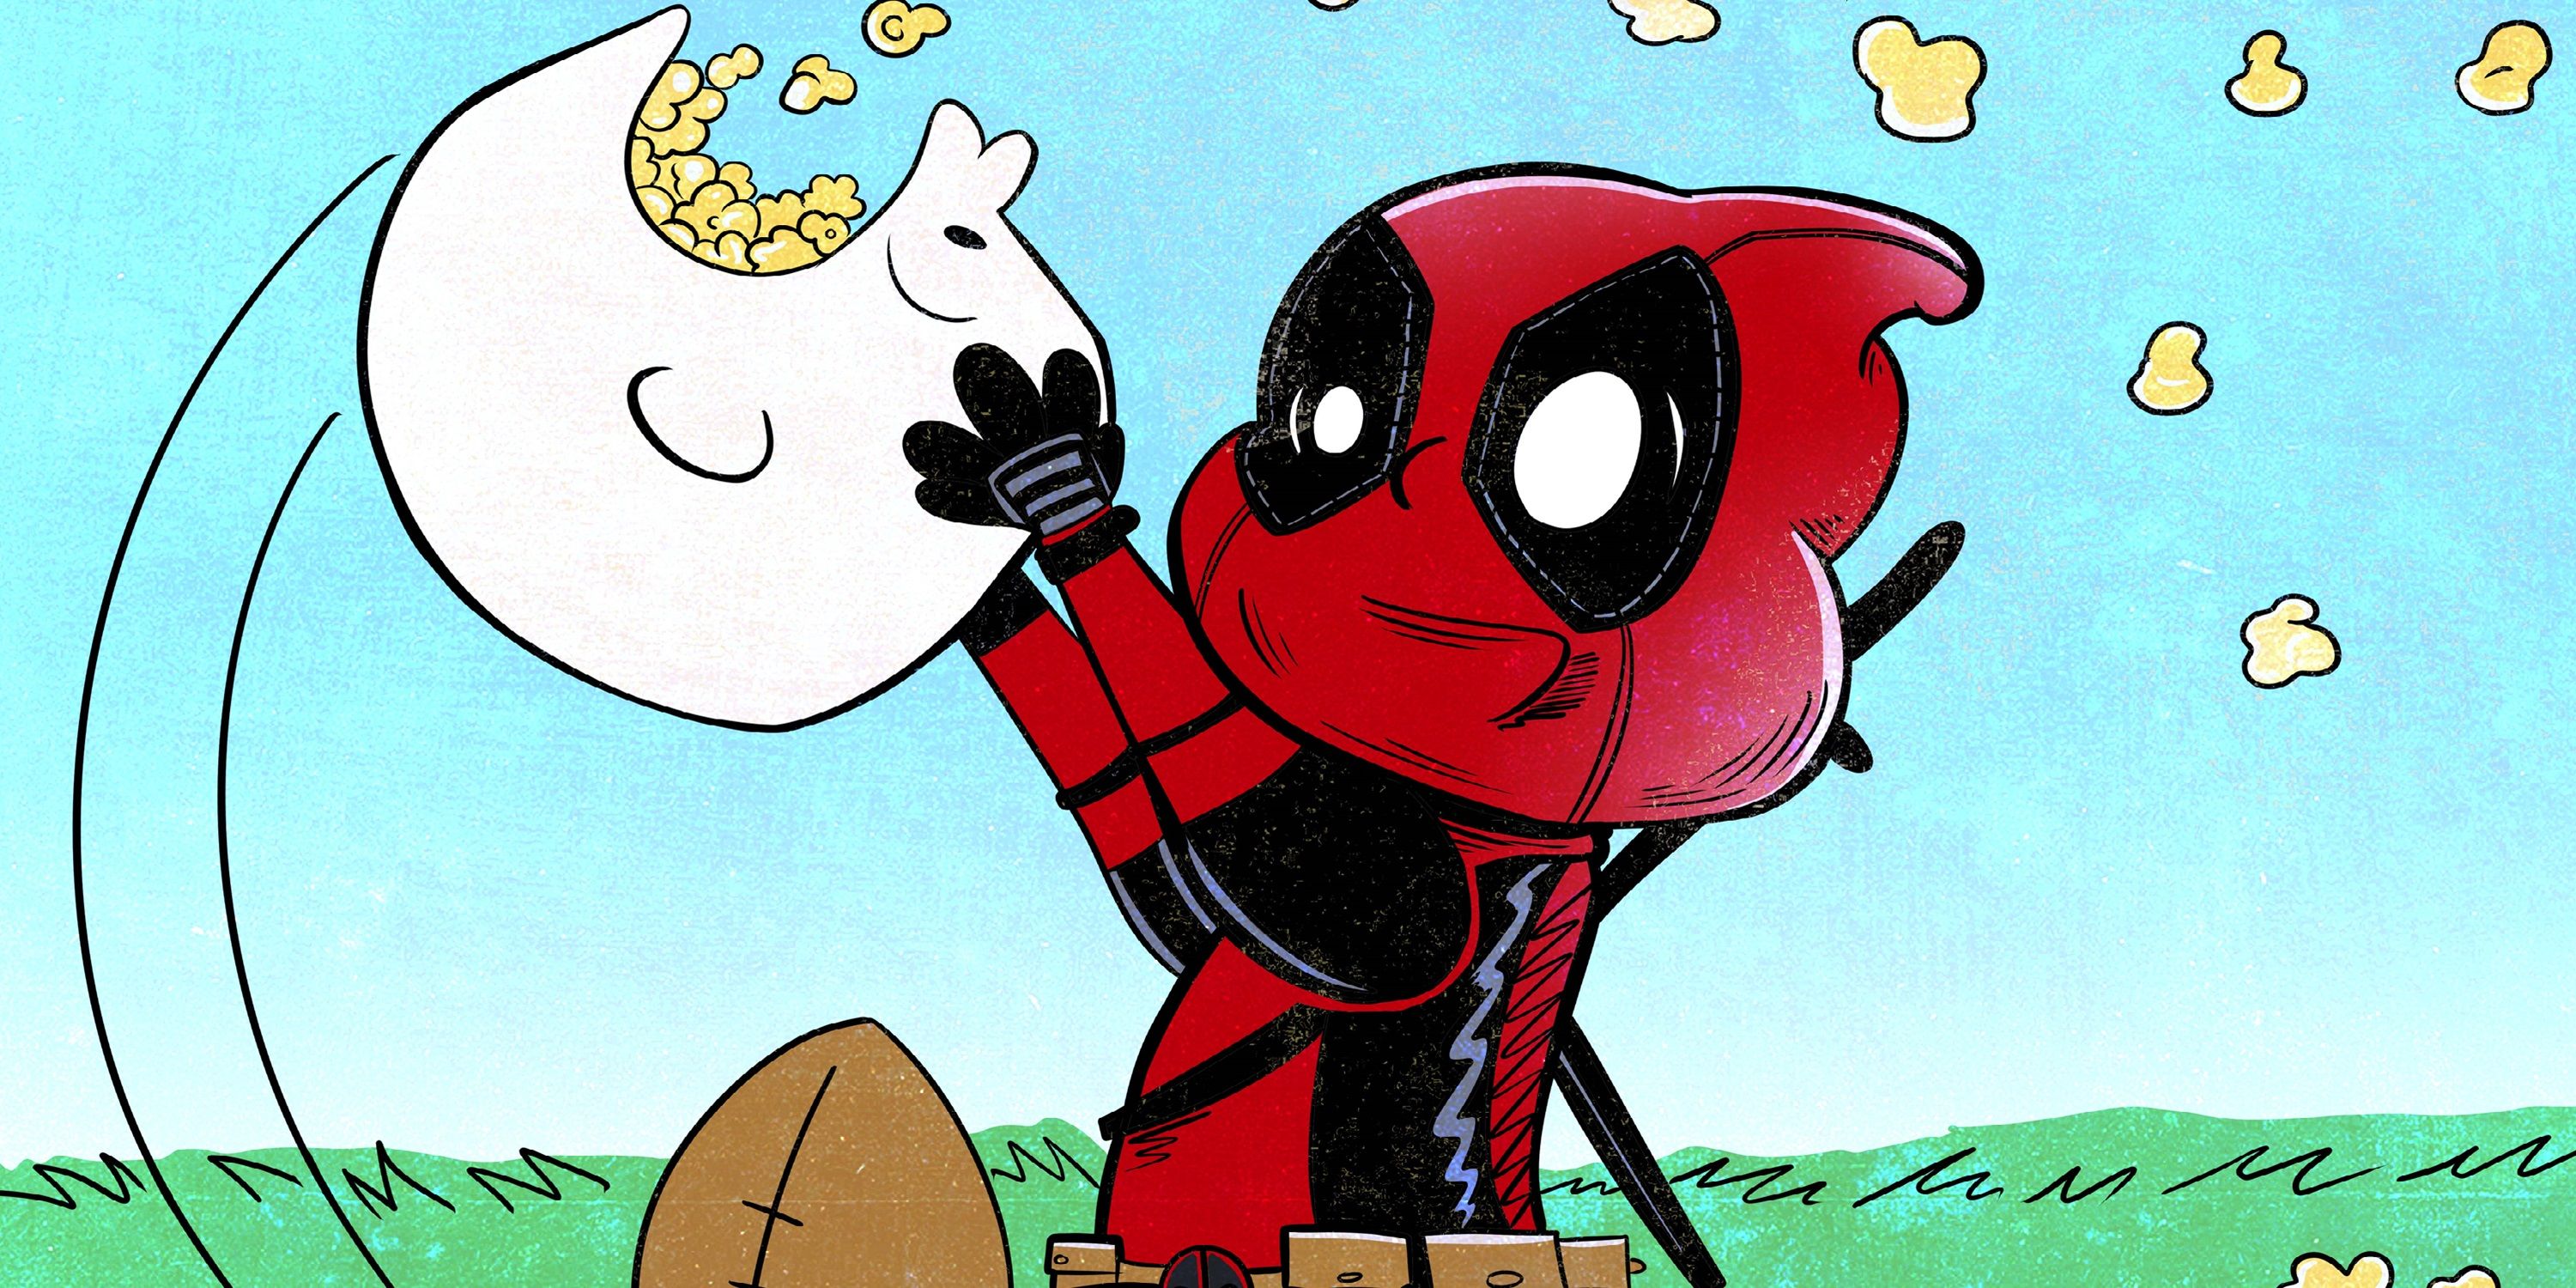 Deadpool eats popcorn out of a Charlie Brown popcorn bucket